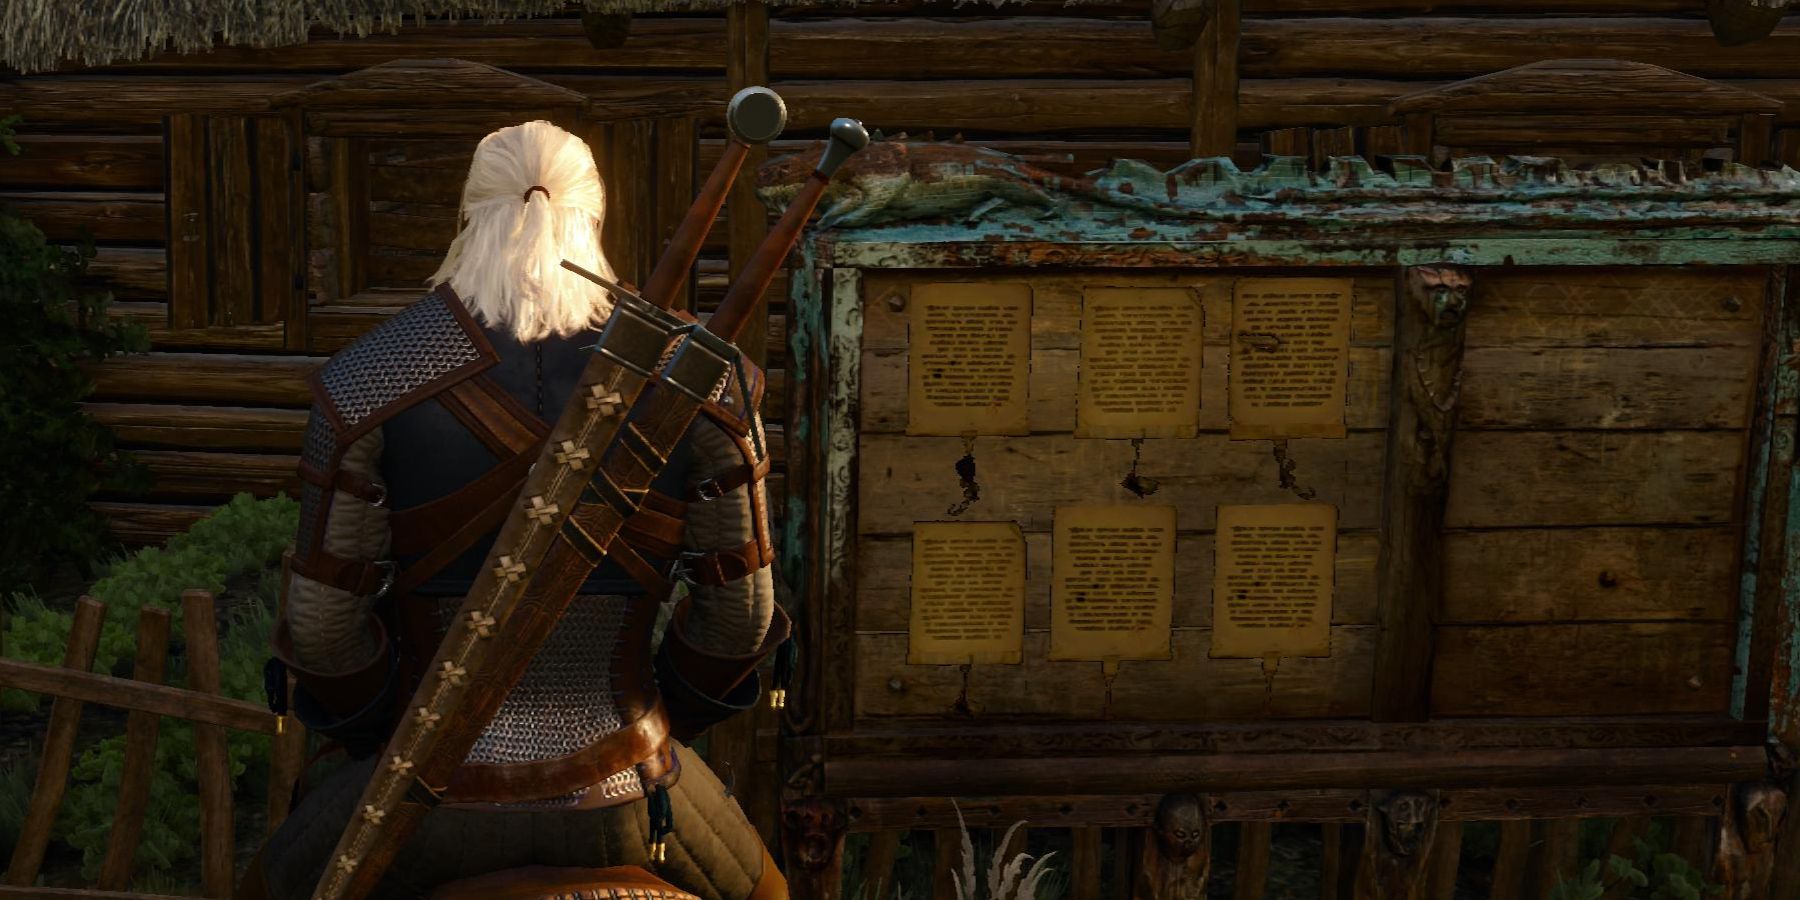 The Witcher 3 Contract Information: An Elusive Thief